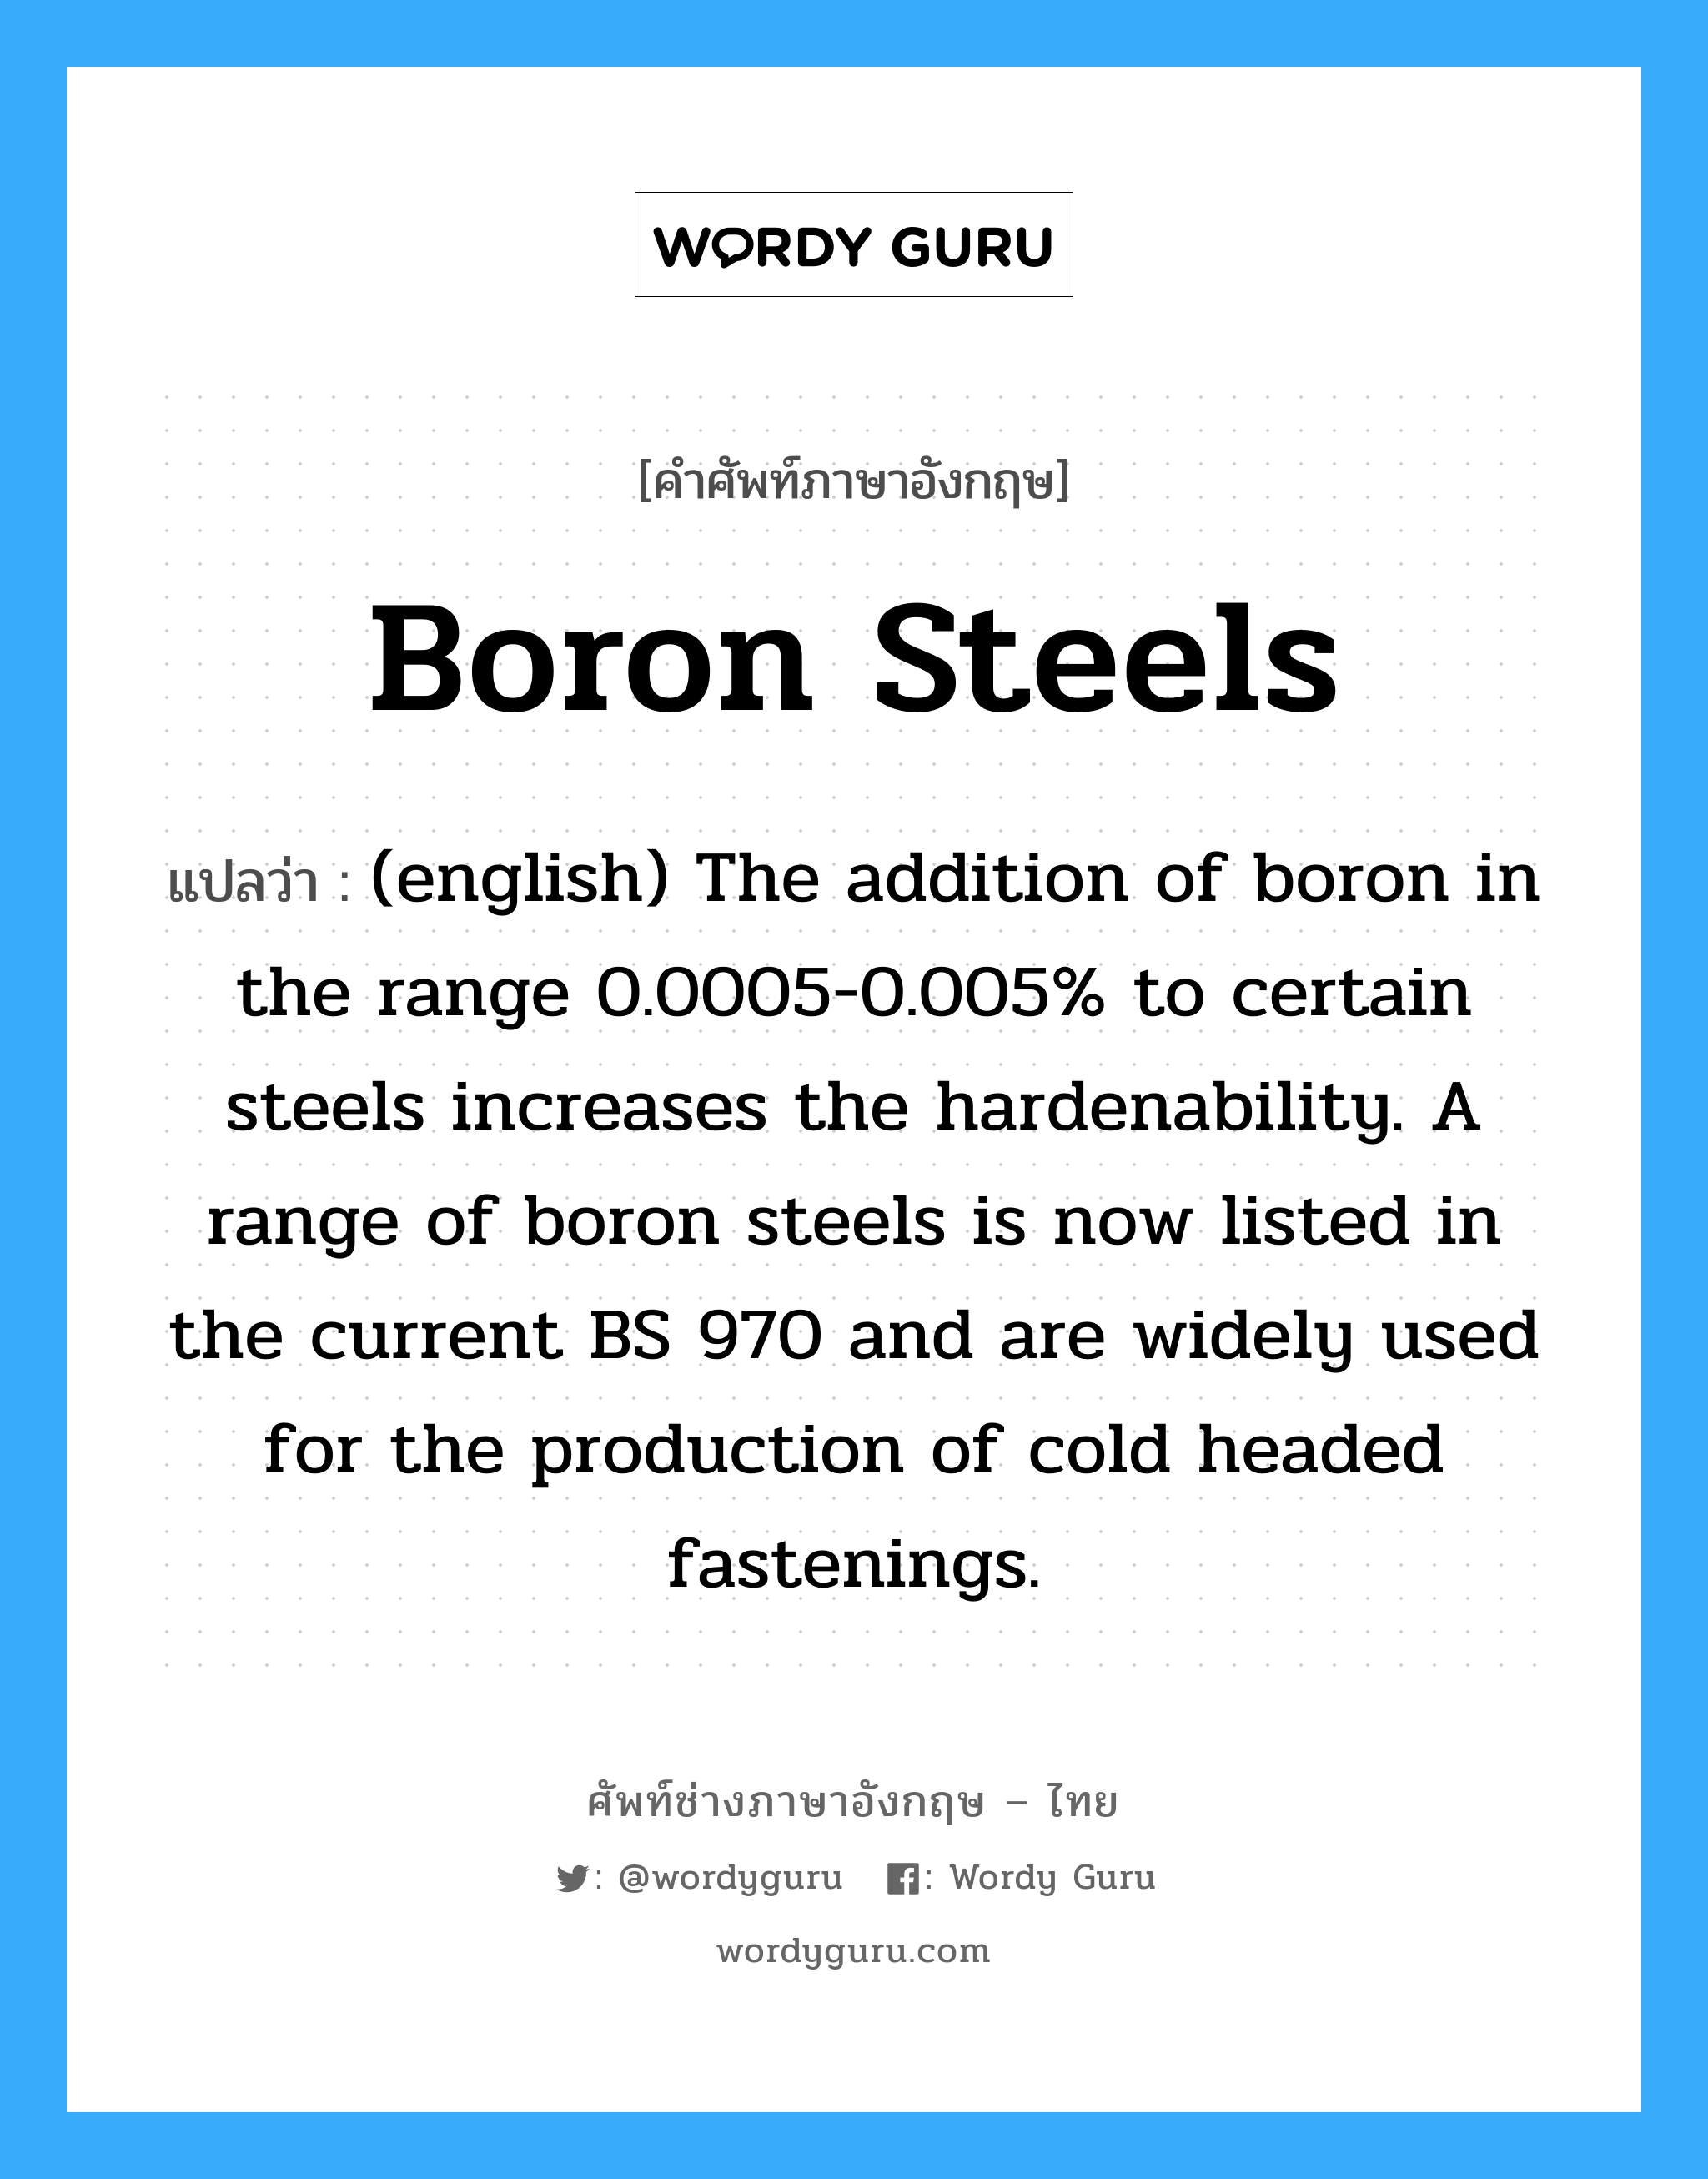 Boron Steels แปลว่า?, คำศัพท์ช่างภาษาอังกฤษ - ไทย Boron Steels คำศัพท์ภาษาอังกฤษ Boron Steels แปลว่า (english) The addition of boron in the range 0.0005-0.005% to certain steels increases the hardenability. A range of boron steels is now listed in the current BS 970 and are widely used for the production of cold headed fastenings.